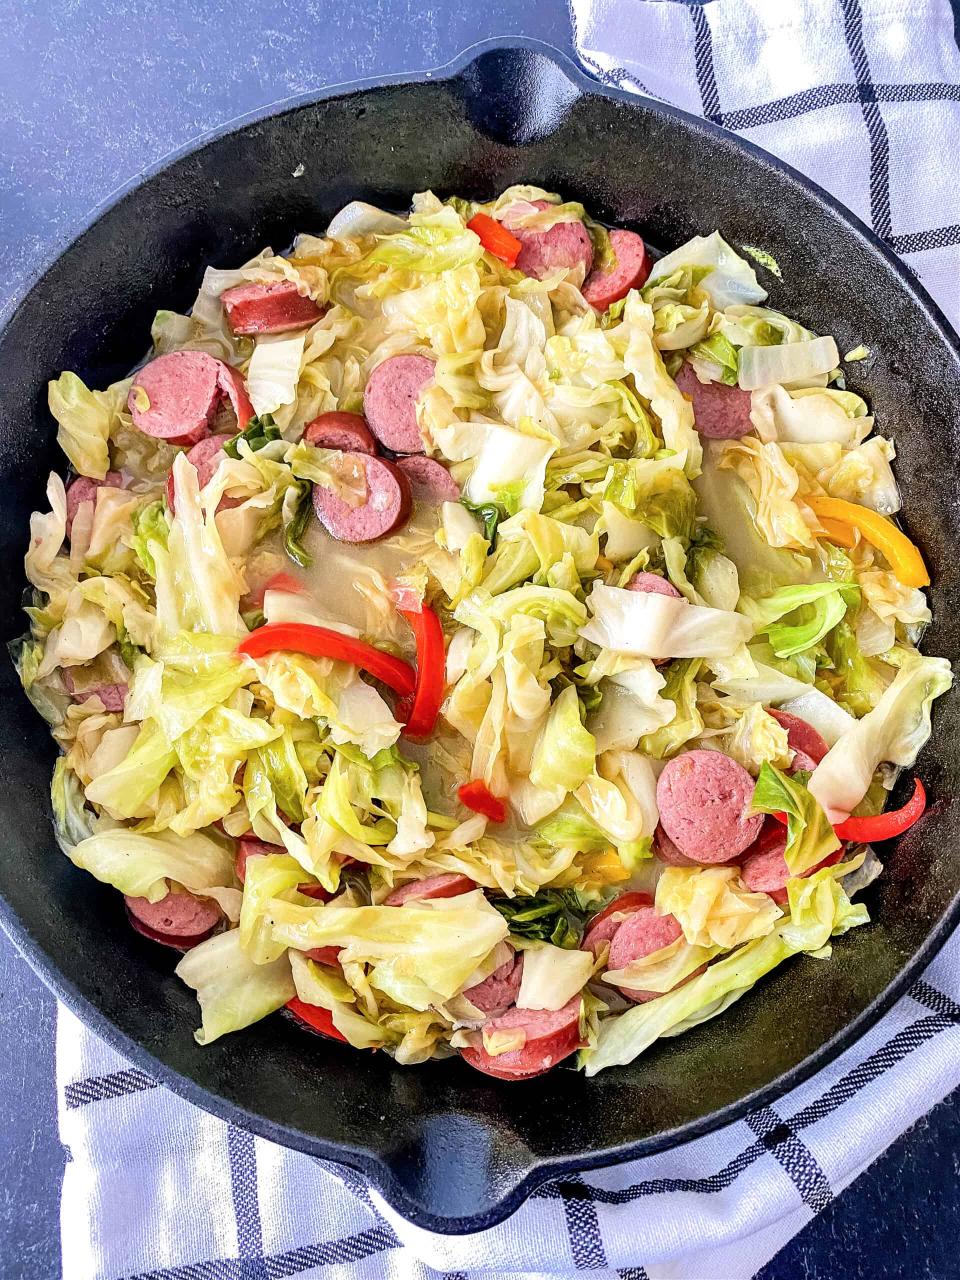 Cabbage and Sausage Skillet Recipe - Southern Kissed